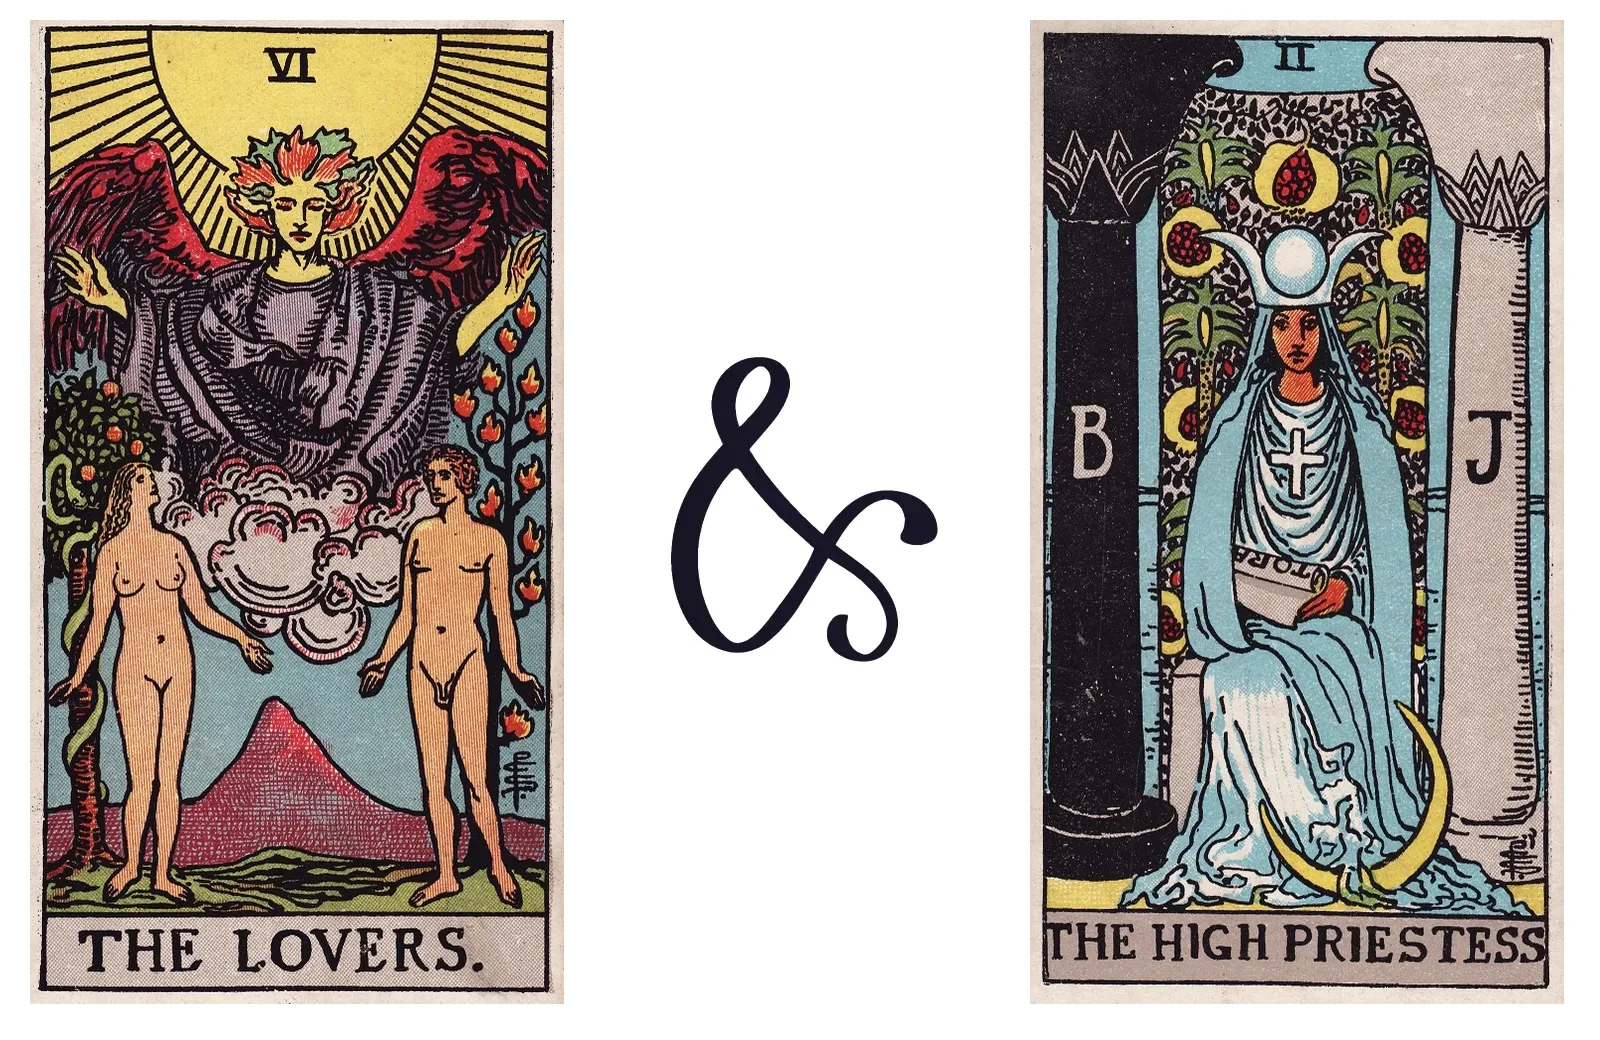 The Lovers and The High Priestess